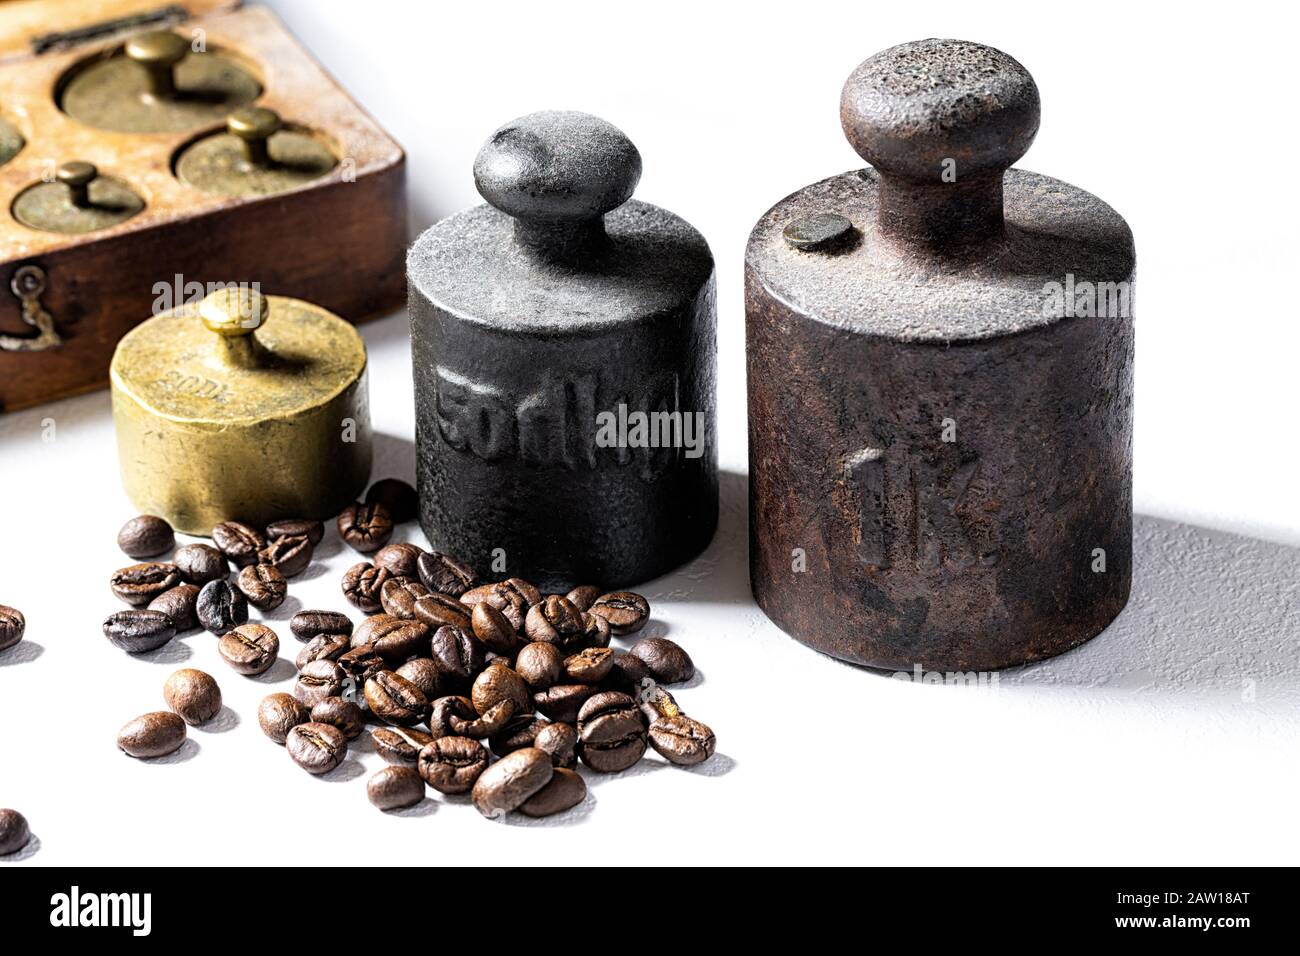 Old rustic metal weights with coffee beans on white background. Stock Photo